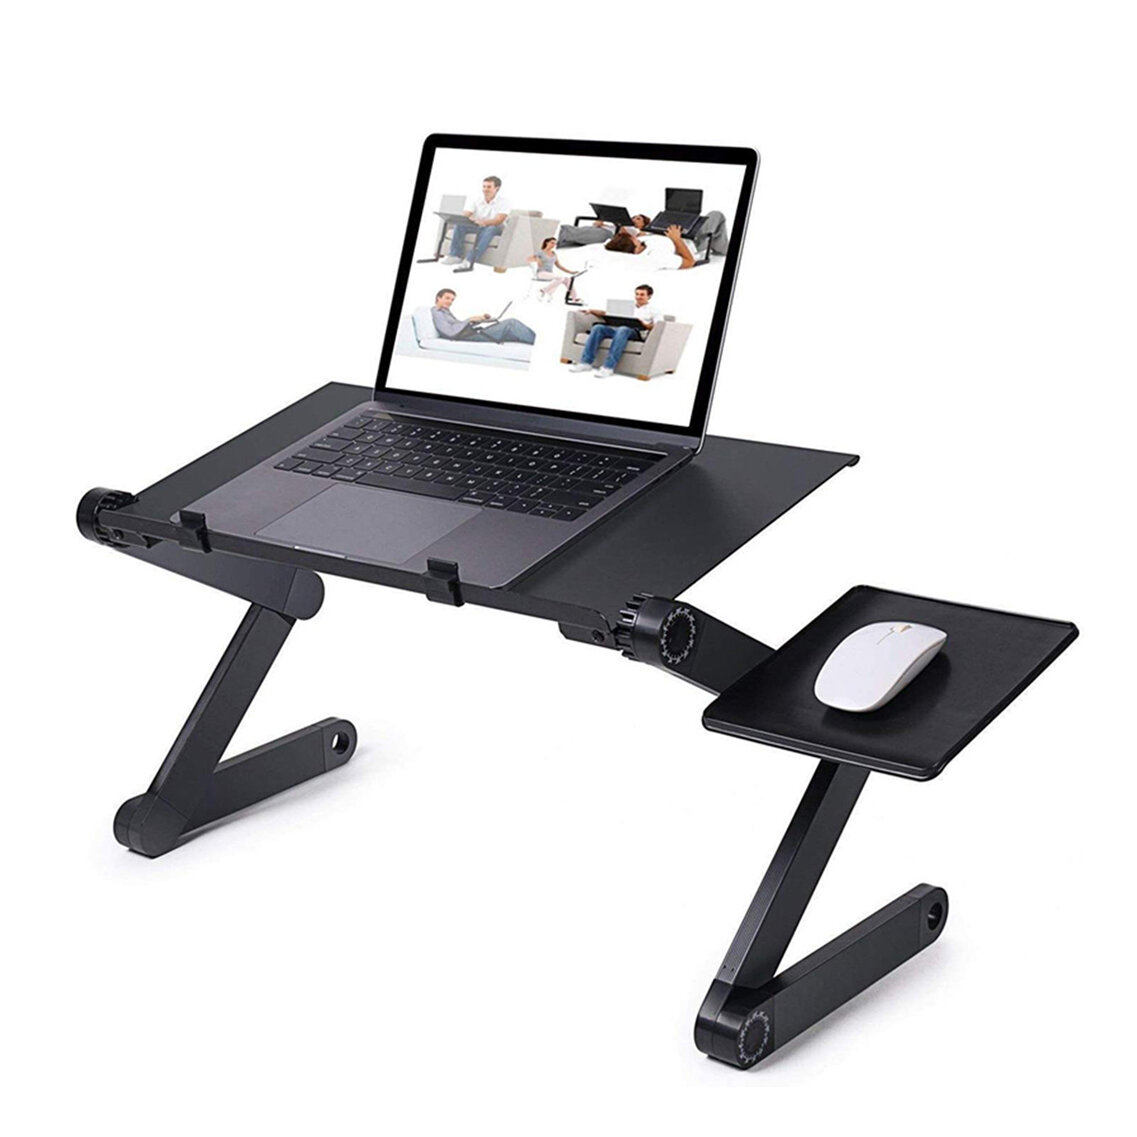 Adjustable Laptop Table Laptop Desk Portable Foldable Stand Bed Tray Laptop with Cooling Fan and Mouse Pad for up to 17